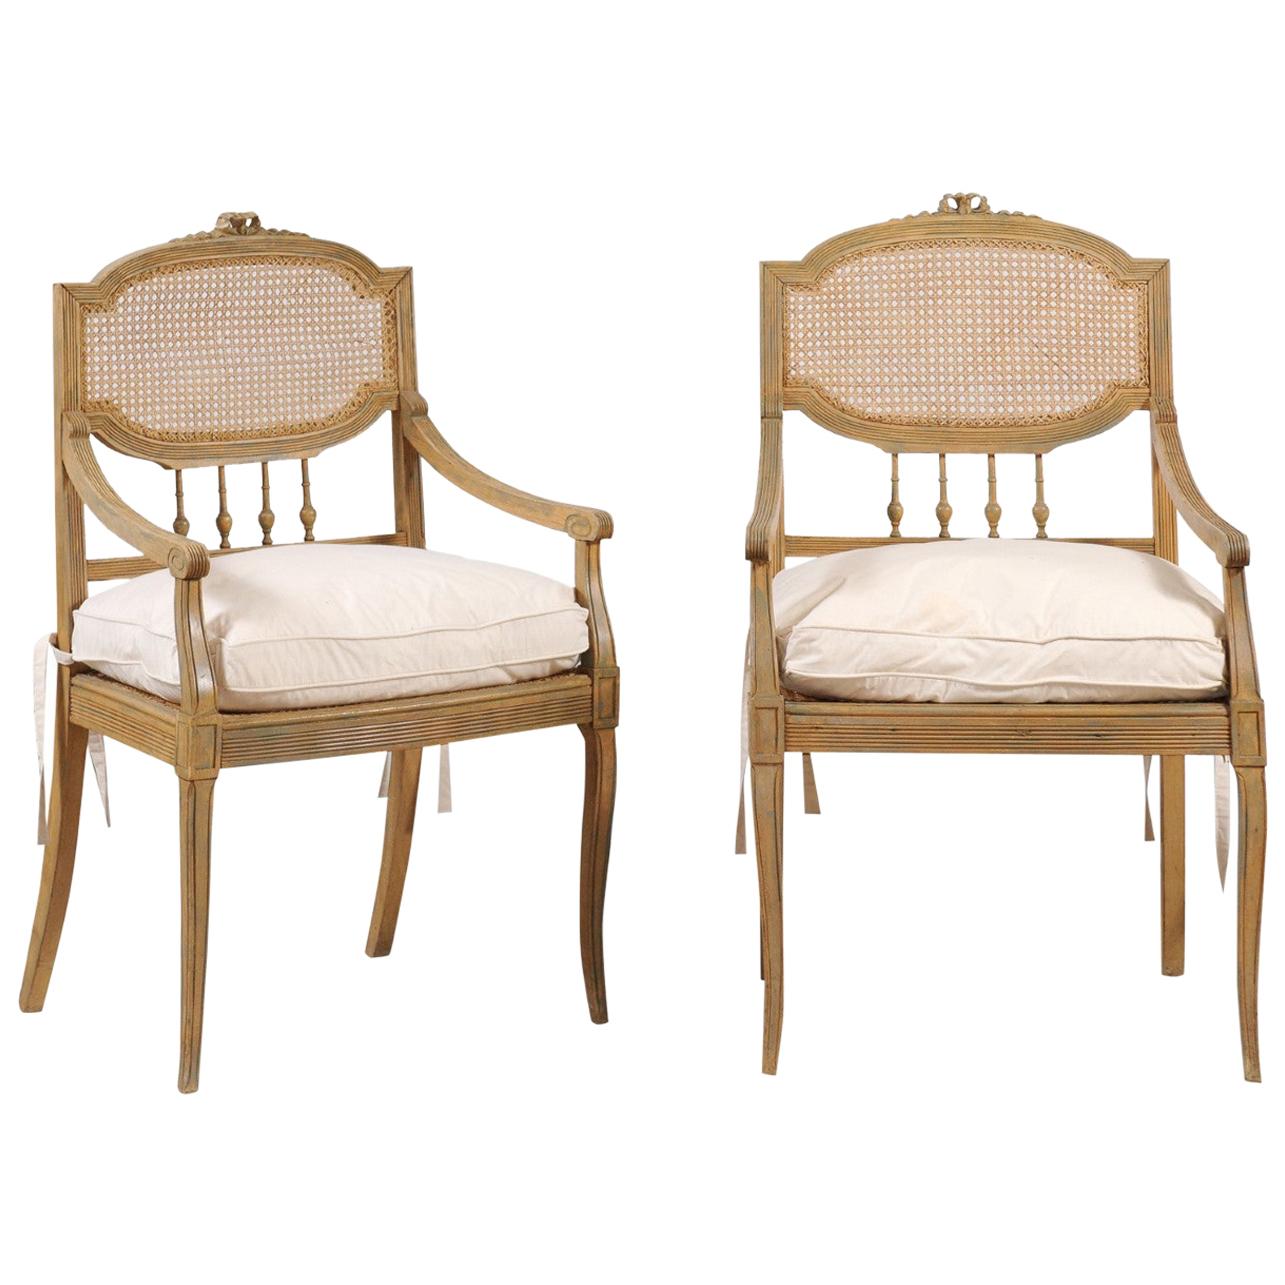 Pair of French 19th Century Wood and Cane Armchairs with New Custom Cushions